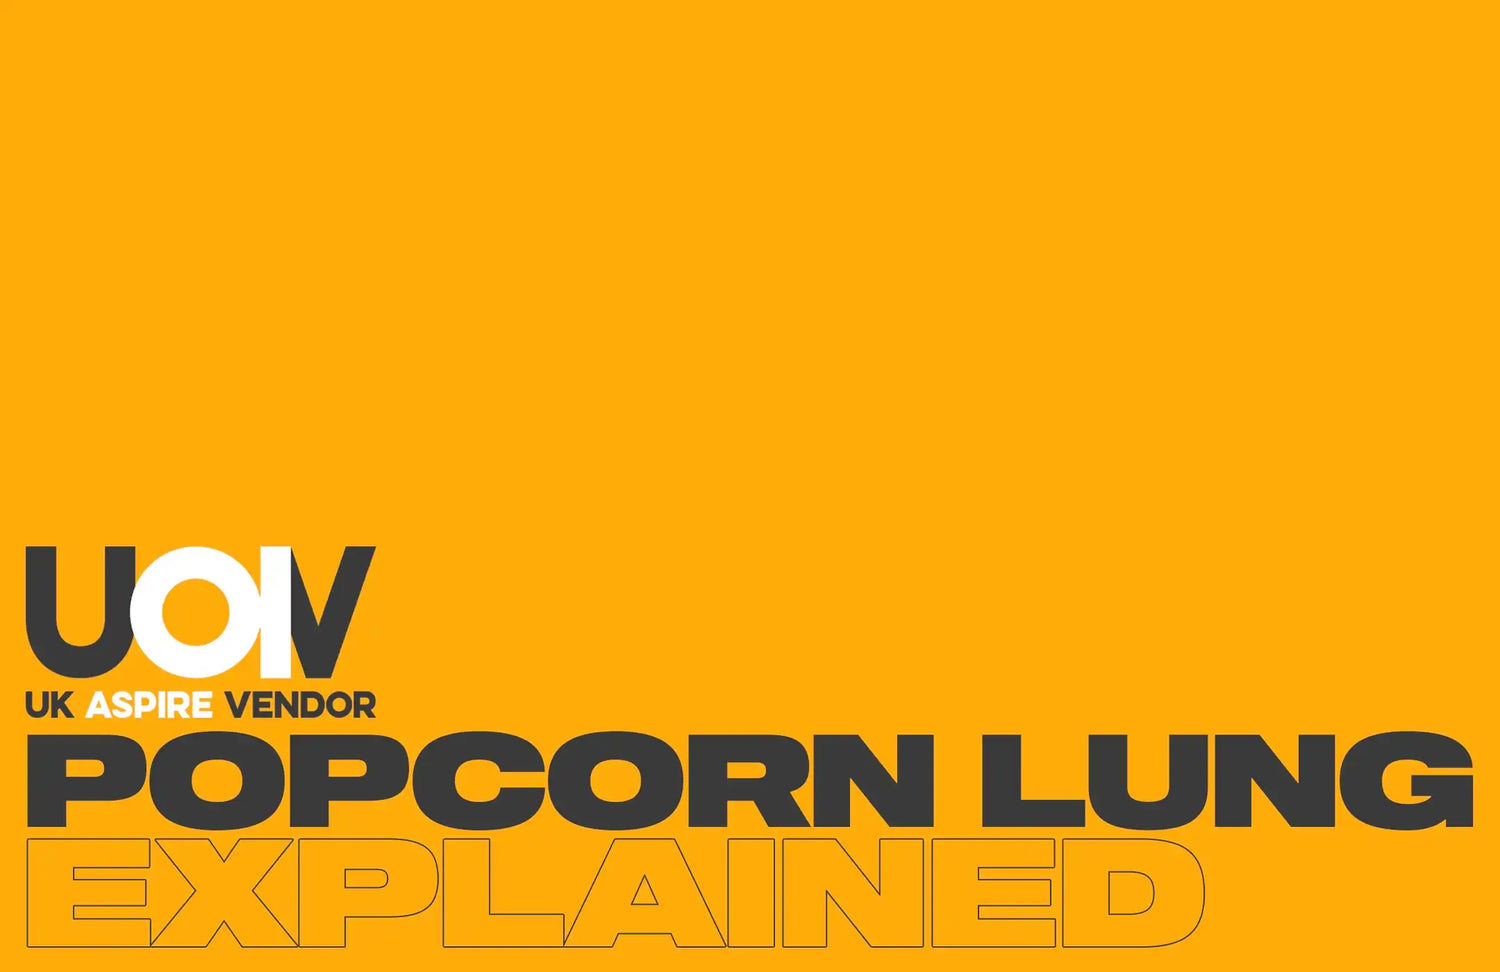 Popcorn lung, also known as bronchiolitis obliterans, is a serious respiratory condition that results in damage to the lungs. Learn how you as a vaper cannot contract it.